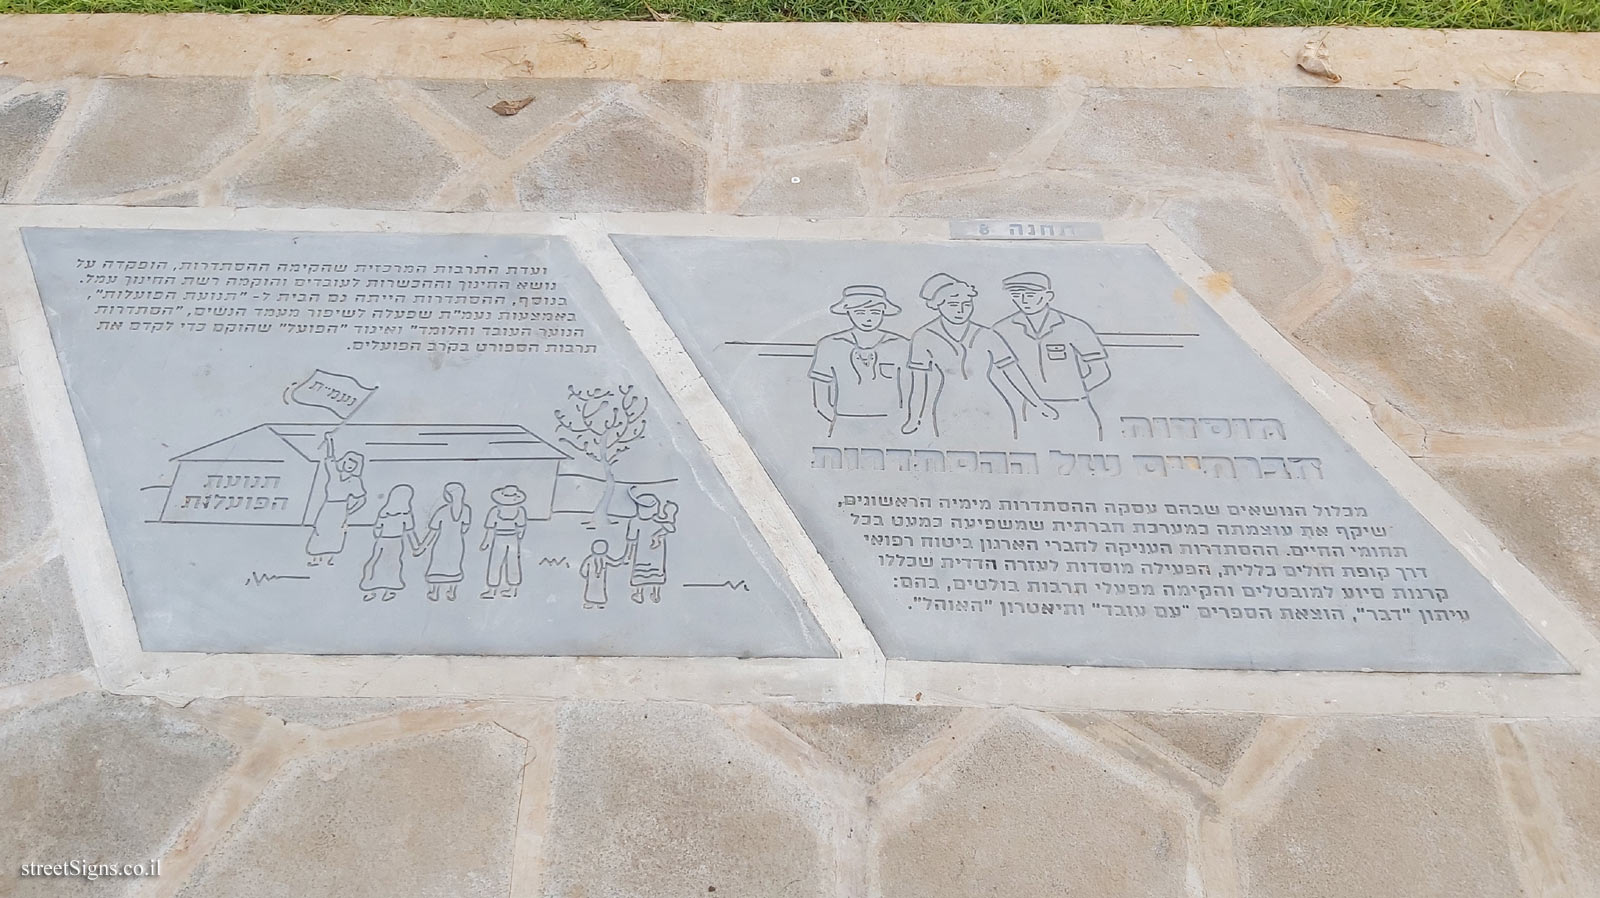 Tel Aviv - Youth Movements Trail - Station 8 - Social institutions of the Histadrut